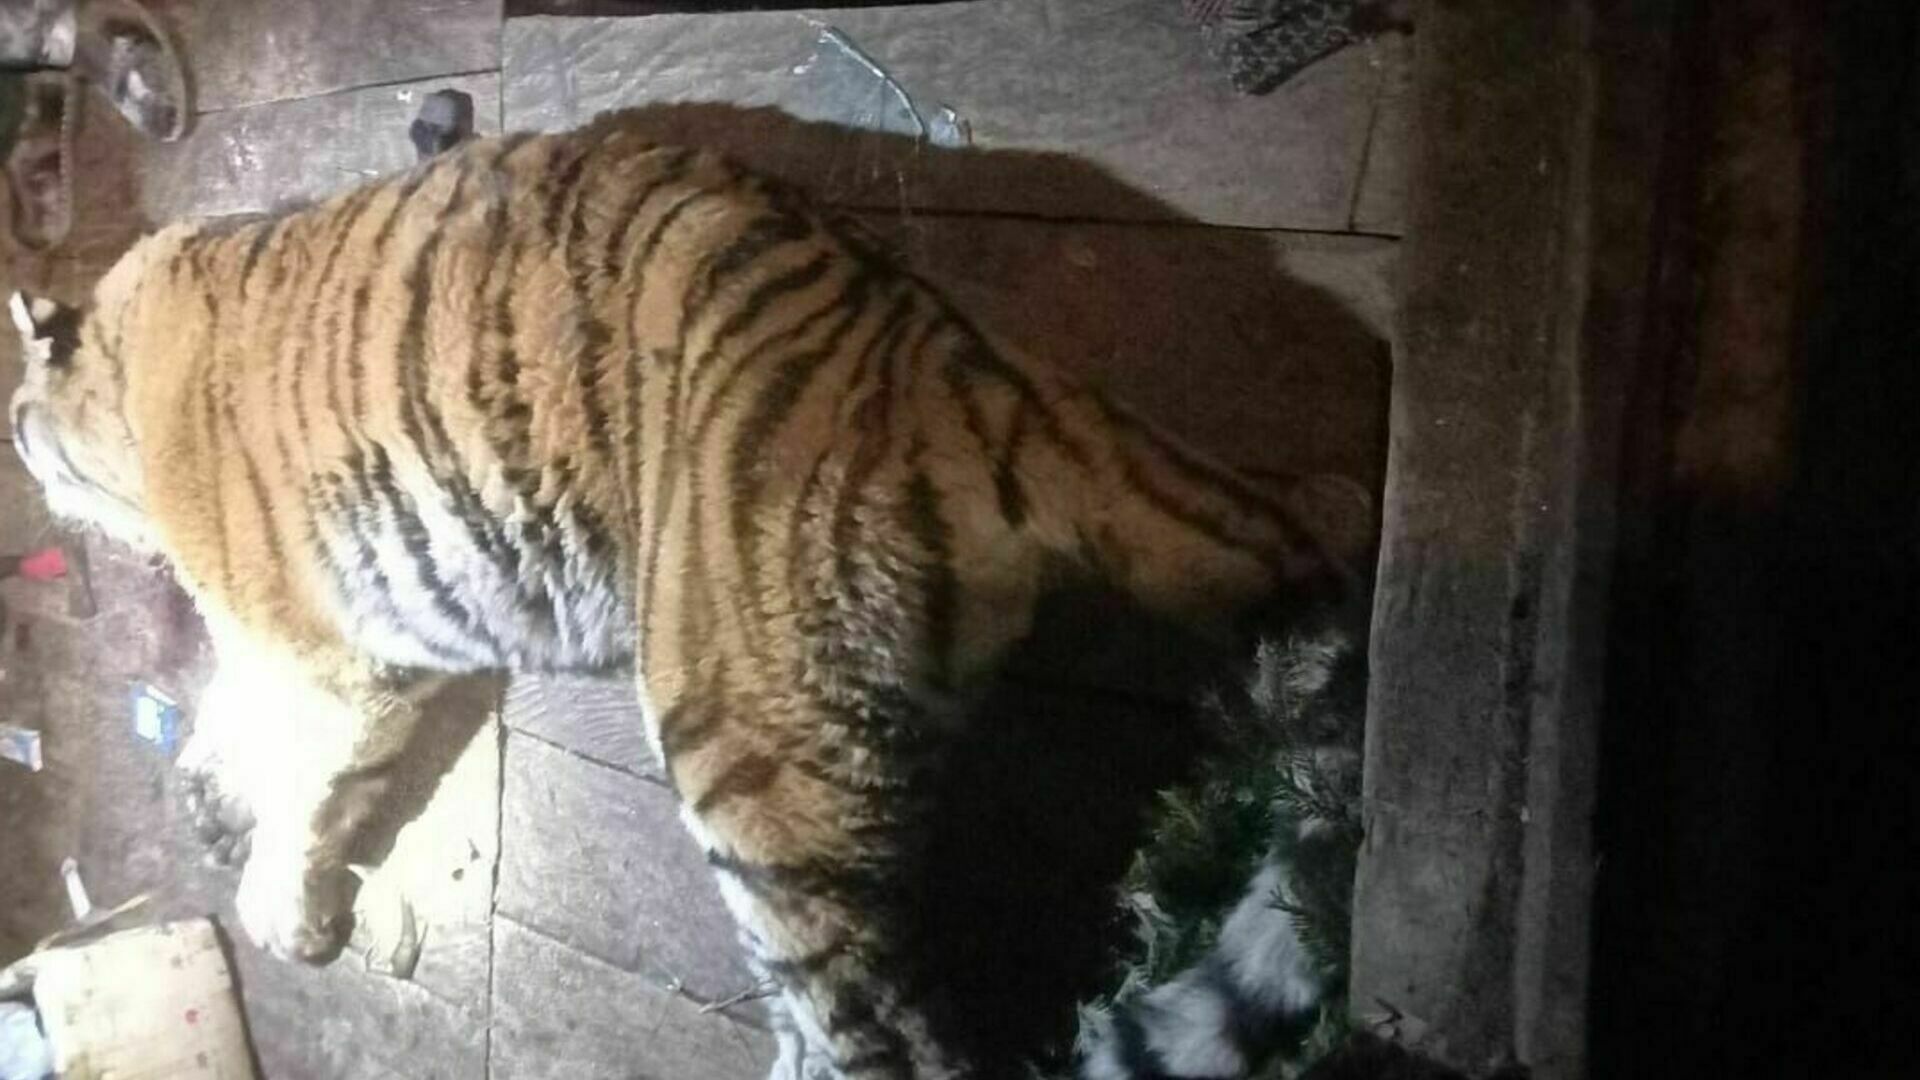 In the Khabarovsk Territory, a tiger broke into a hut, attacked three hunters and killed one